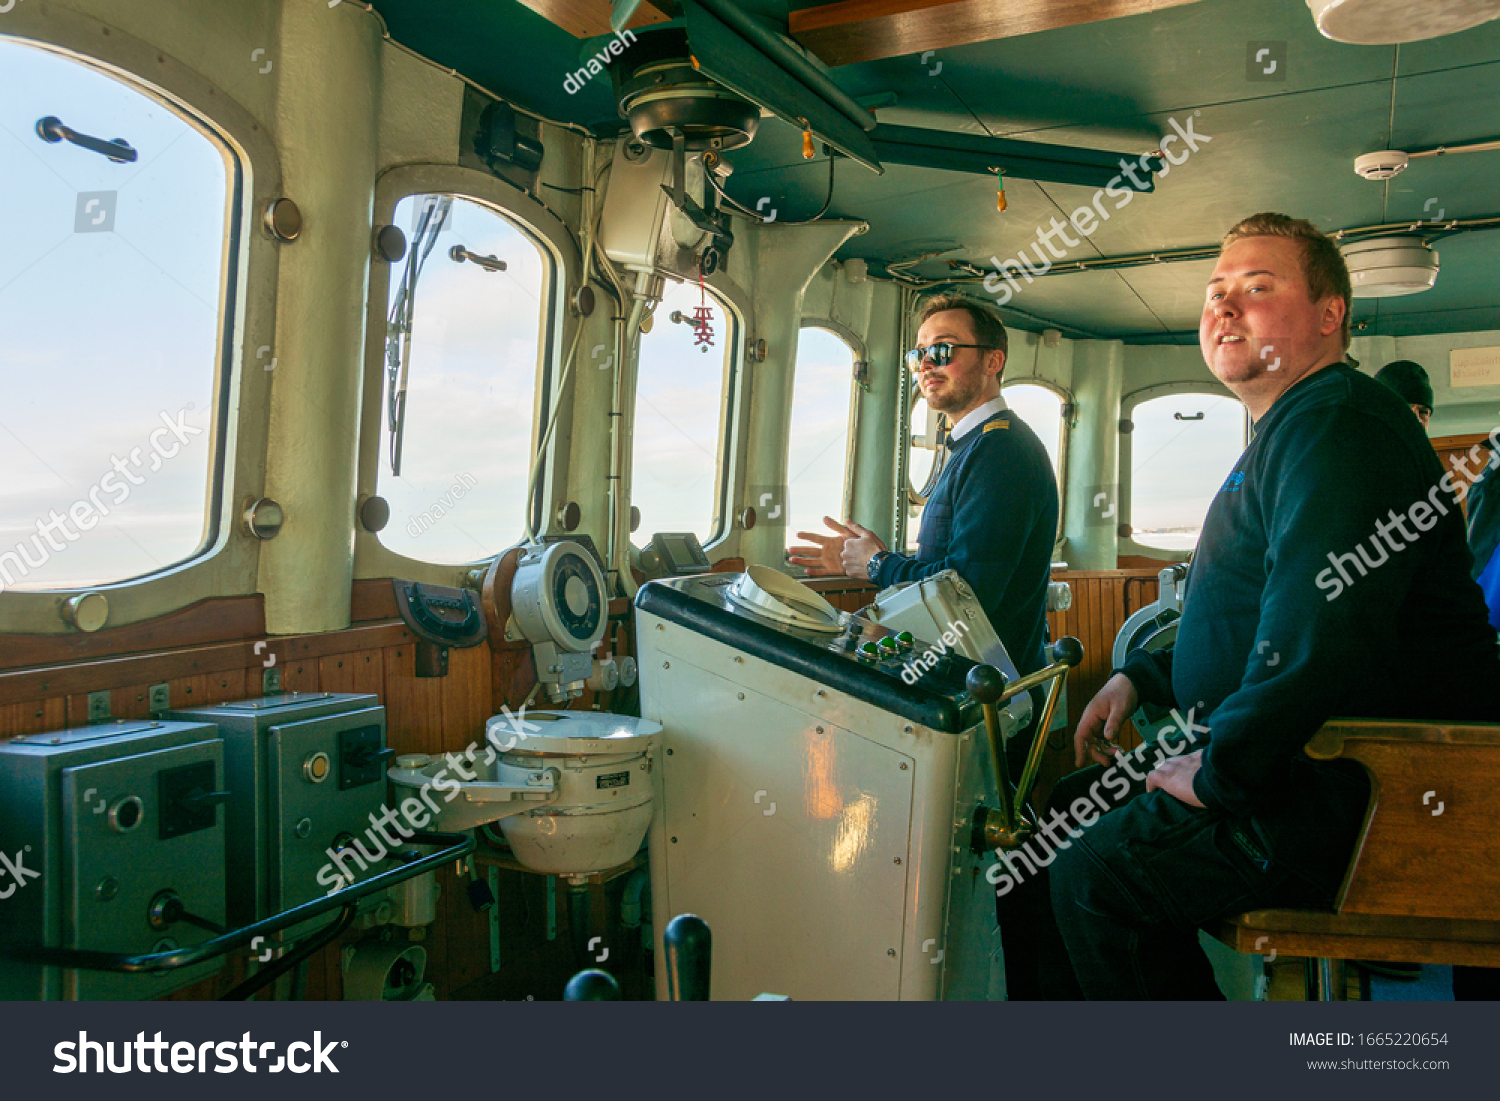 Man Driving Boat Photo Behind Driver Stock Photo 233599459 | Shutterstock